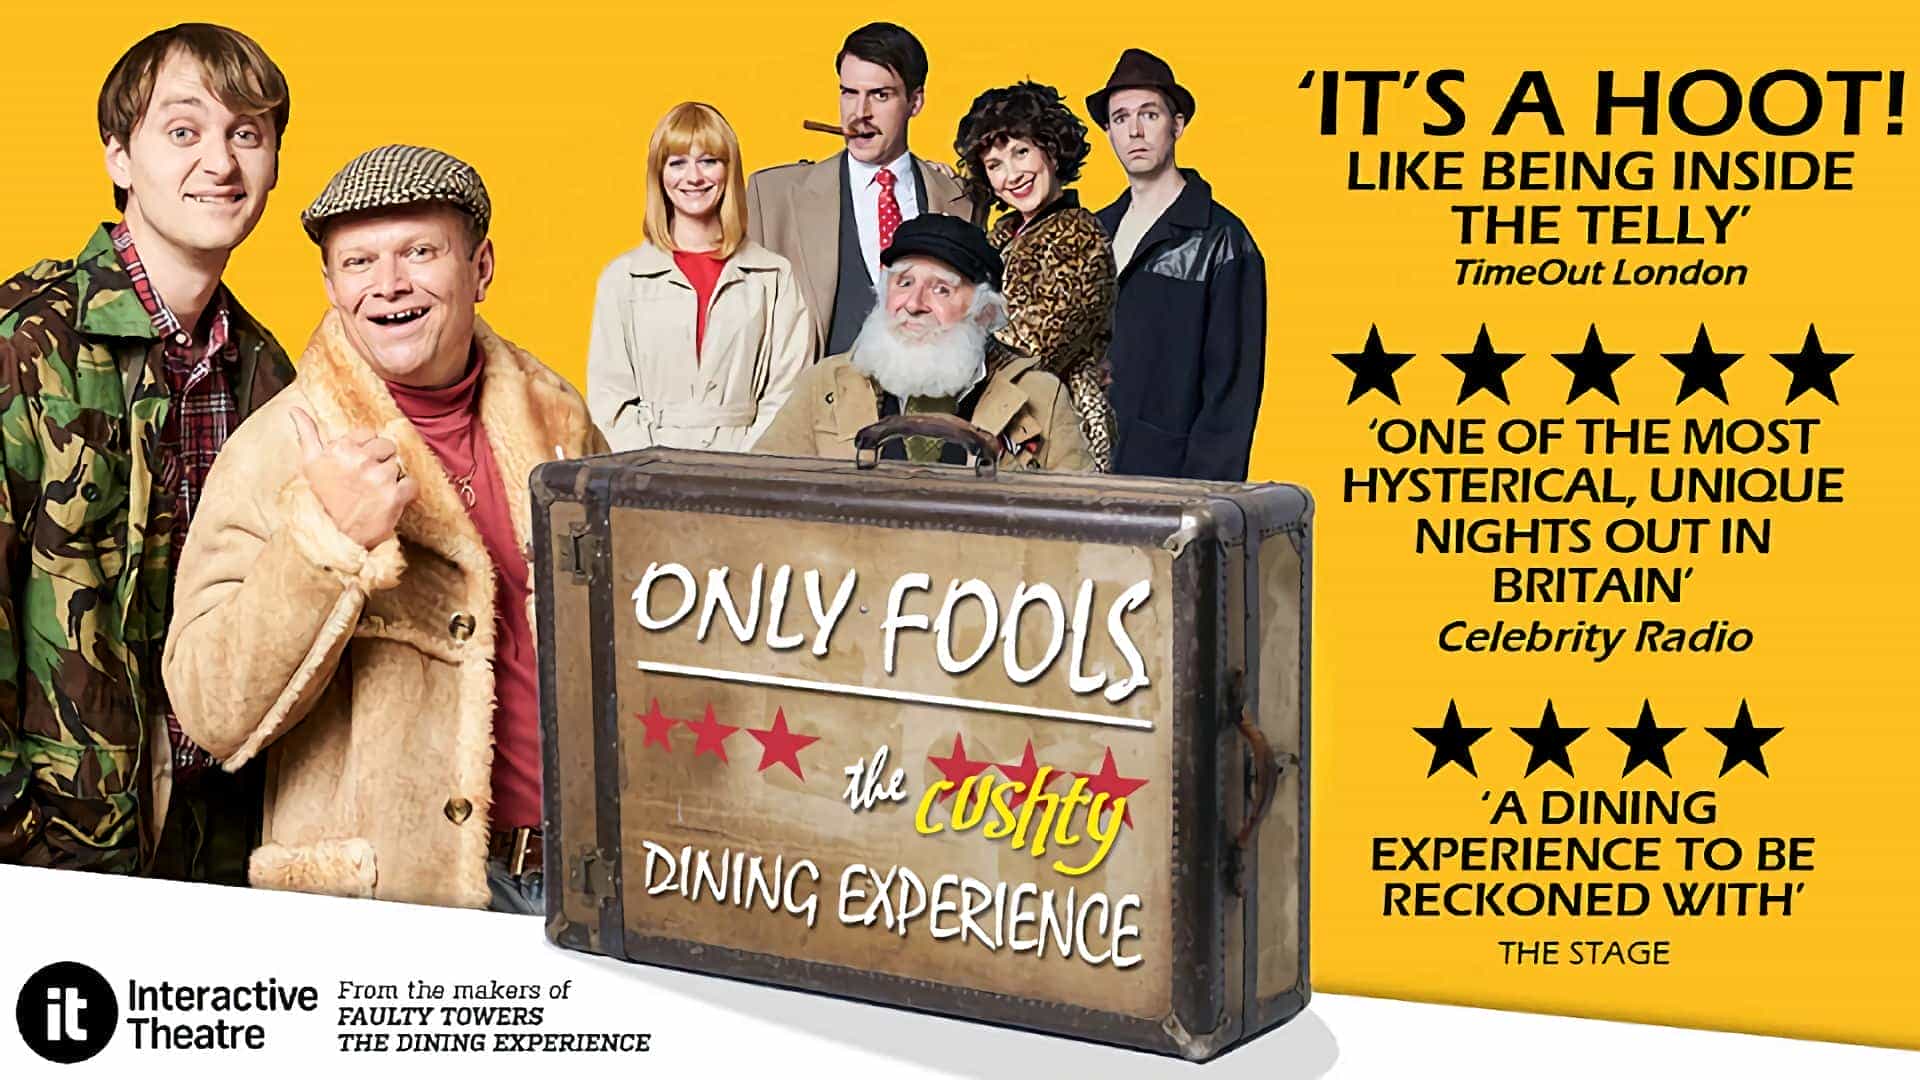 Only Fools - The (Cushty) Dining Experience